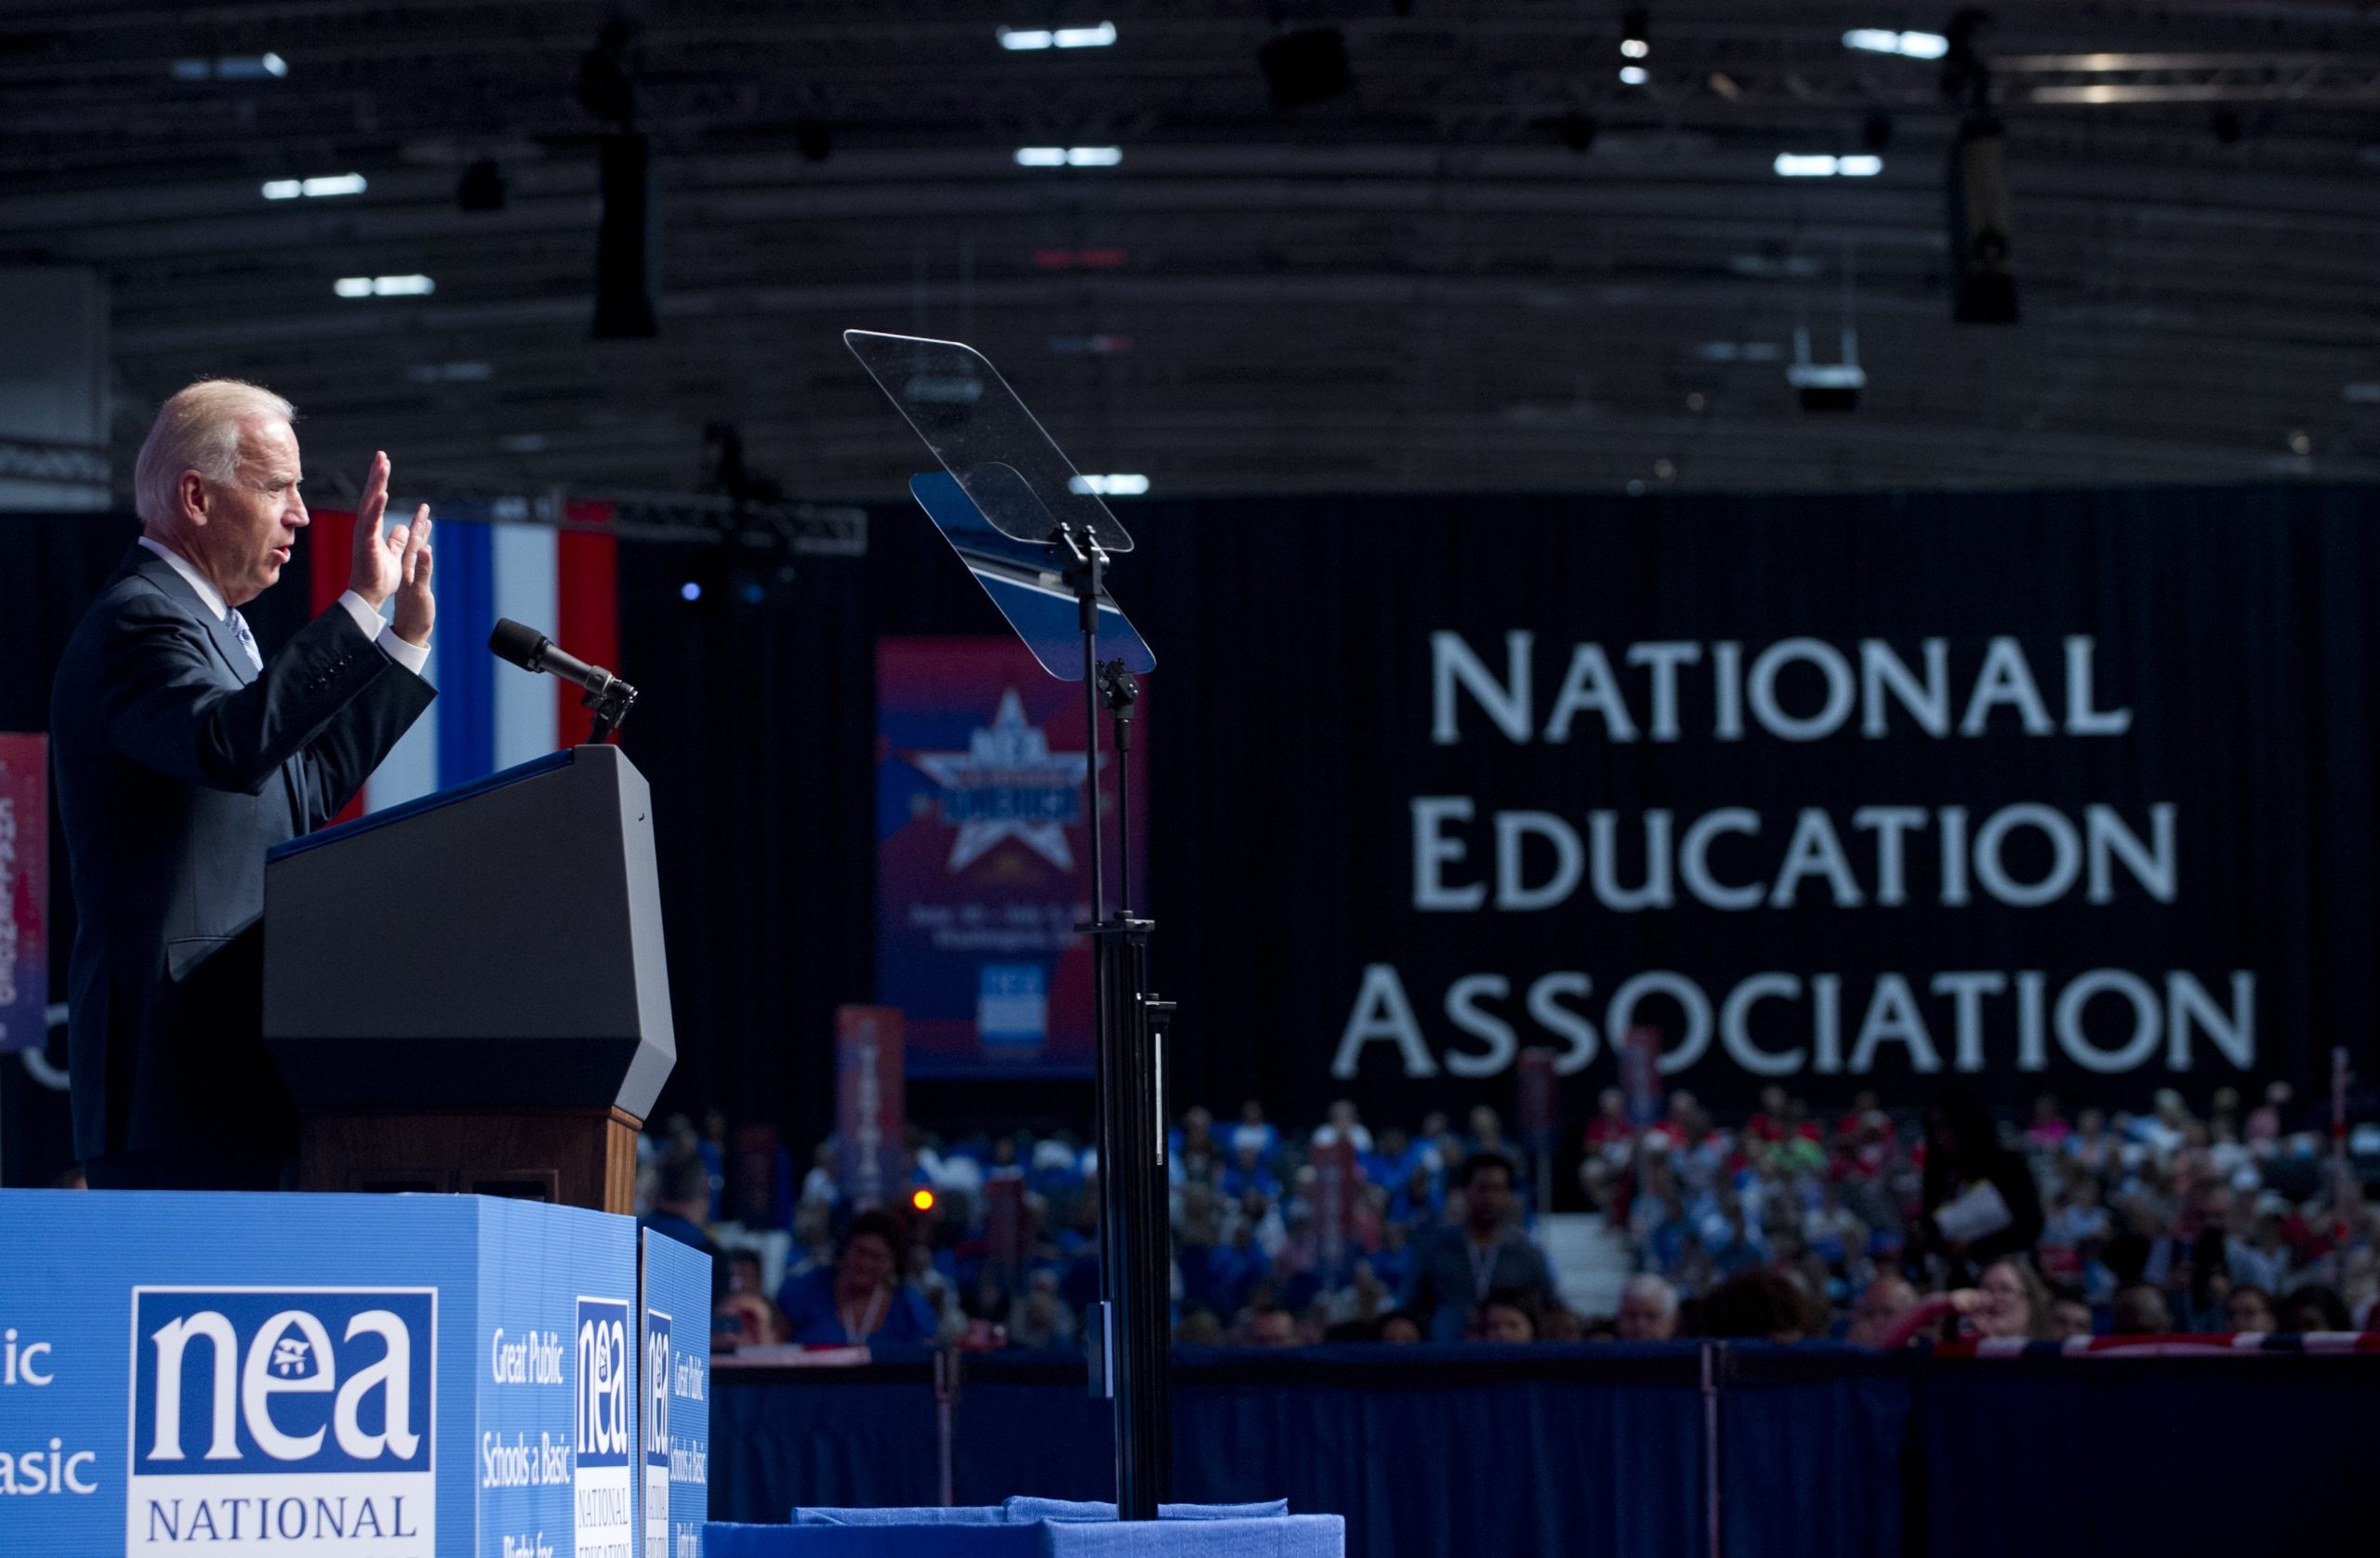 US Vice President Joe Biden speaks during the National Education Association's (NEA) 150th Annual Meeting and 91st Representative Assembly at the Washington Convention Center in Washington, DC, July 3, 2012. AFP PHOTO / Saul LOEB (Photo credit should read SAUL LOEB/AFP/GettyImages)